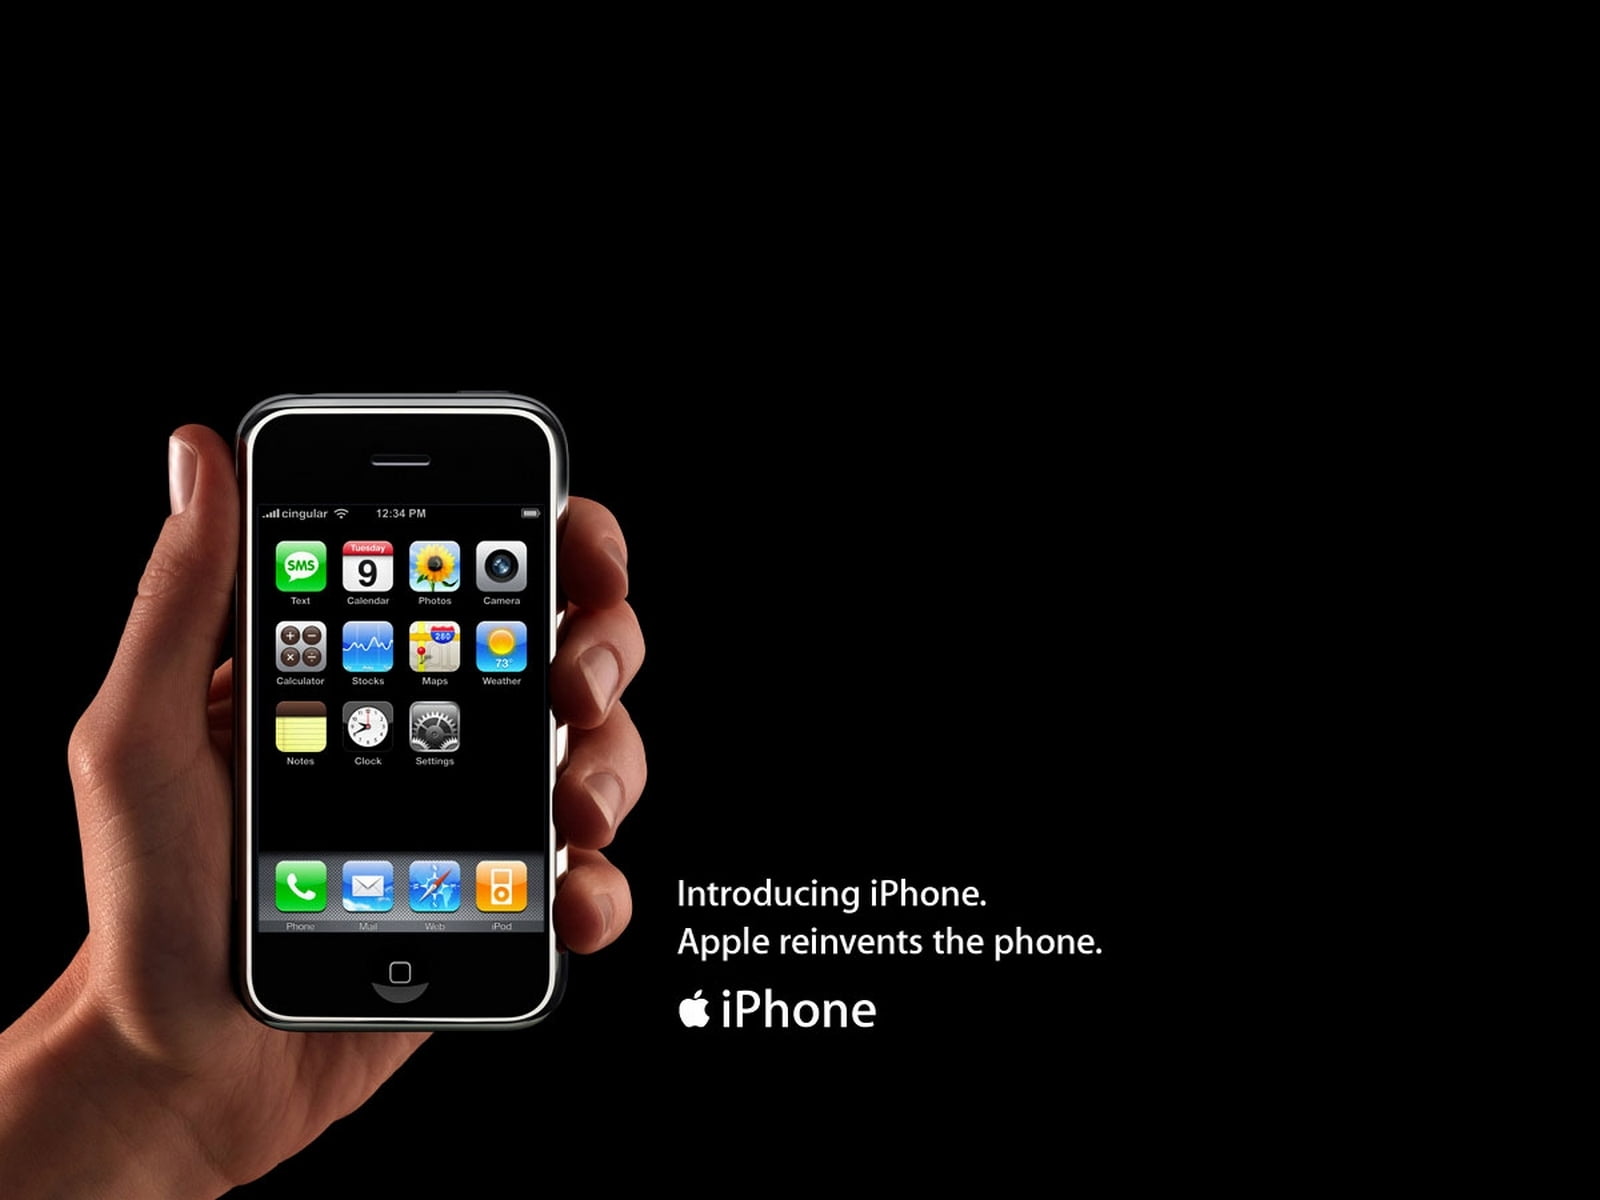 person holding black iPhone 4